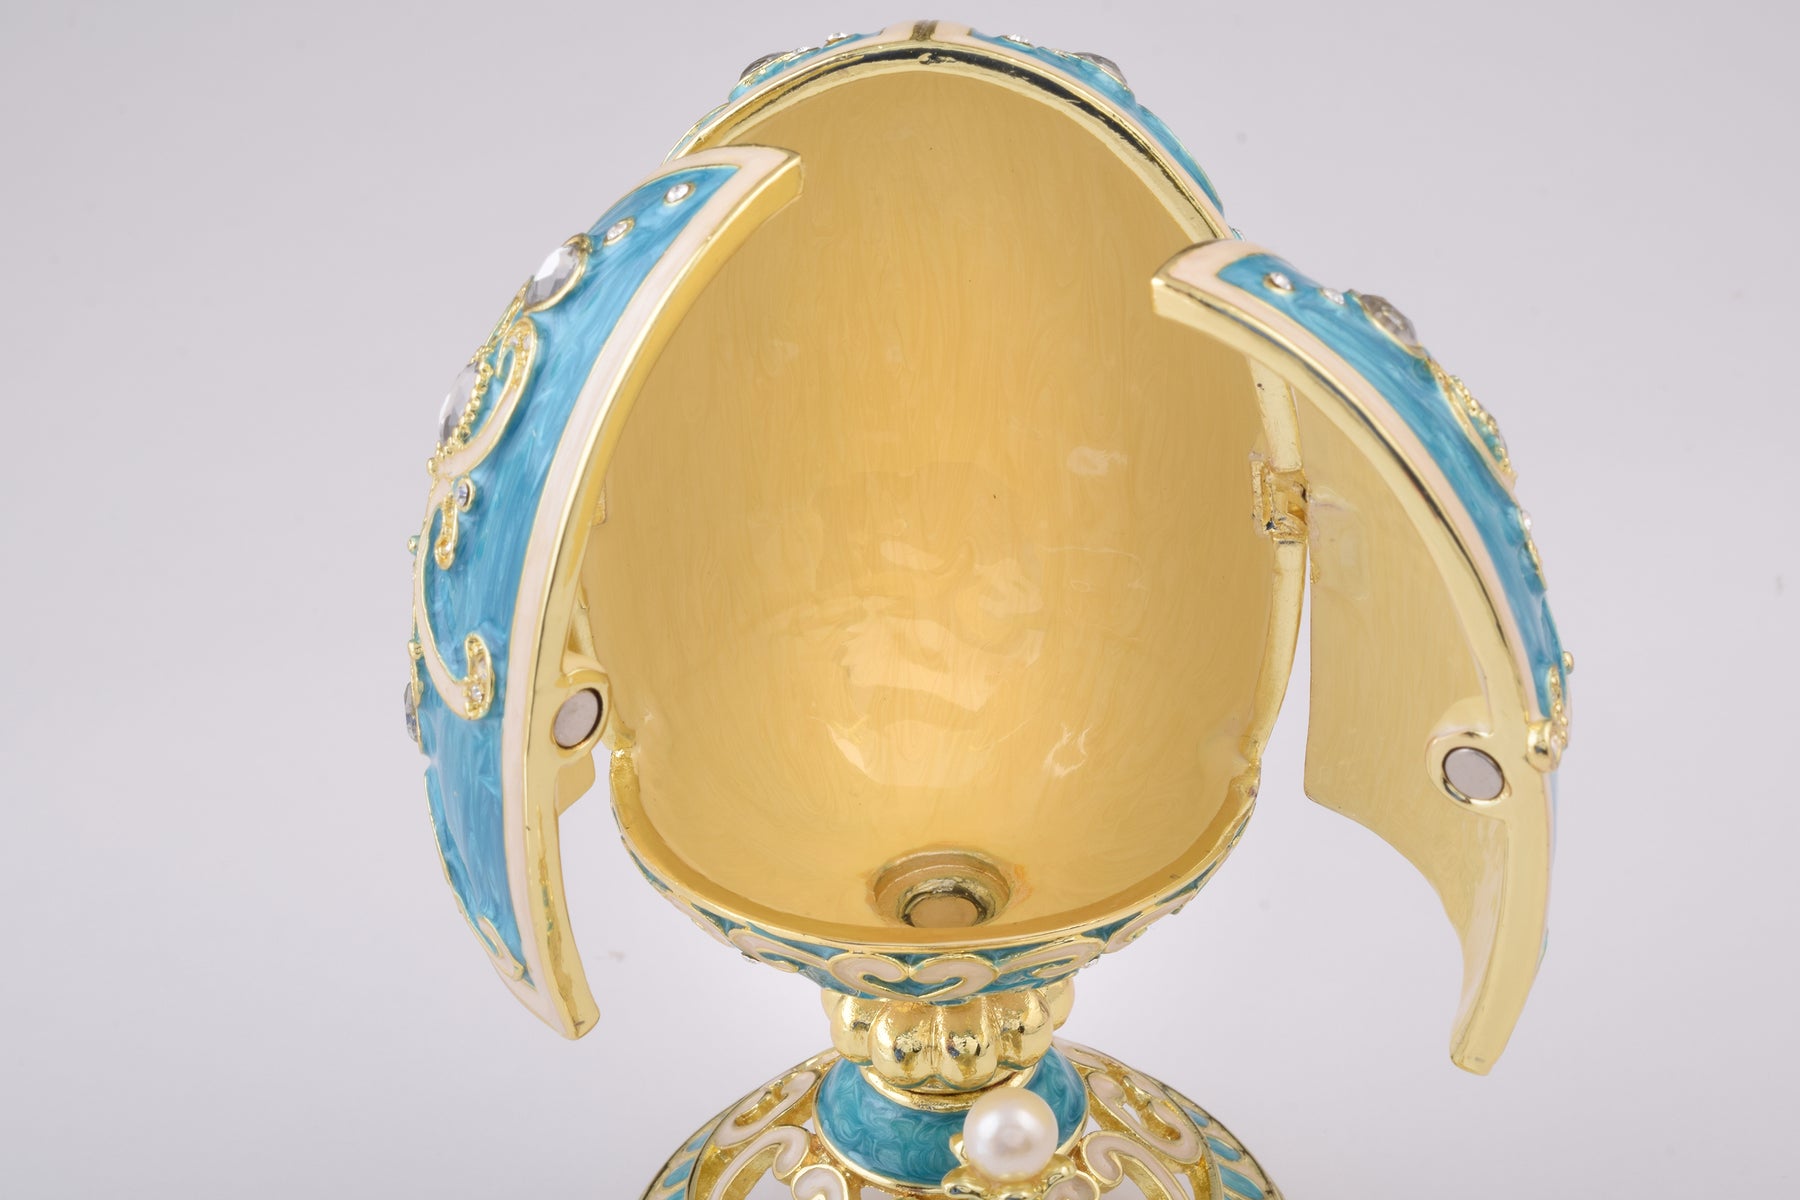 Teal Faberge Egg with Clock Inside